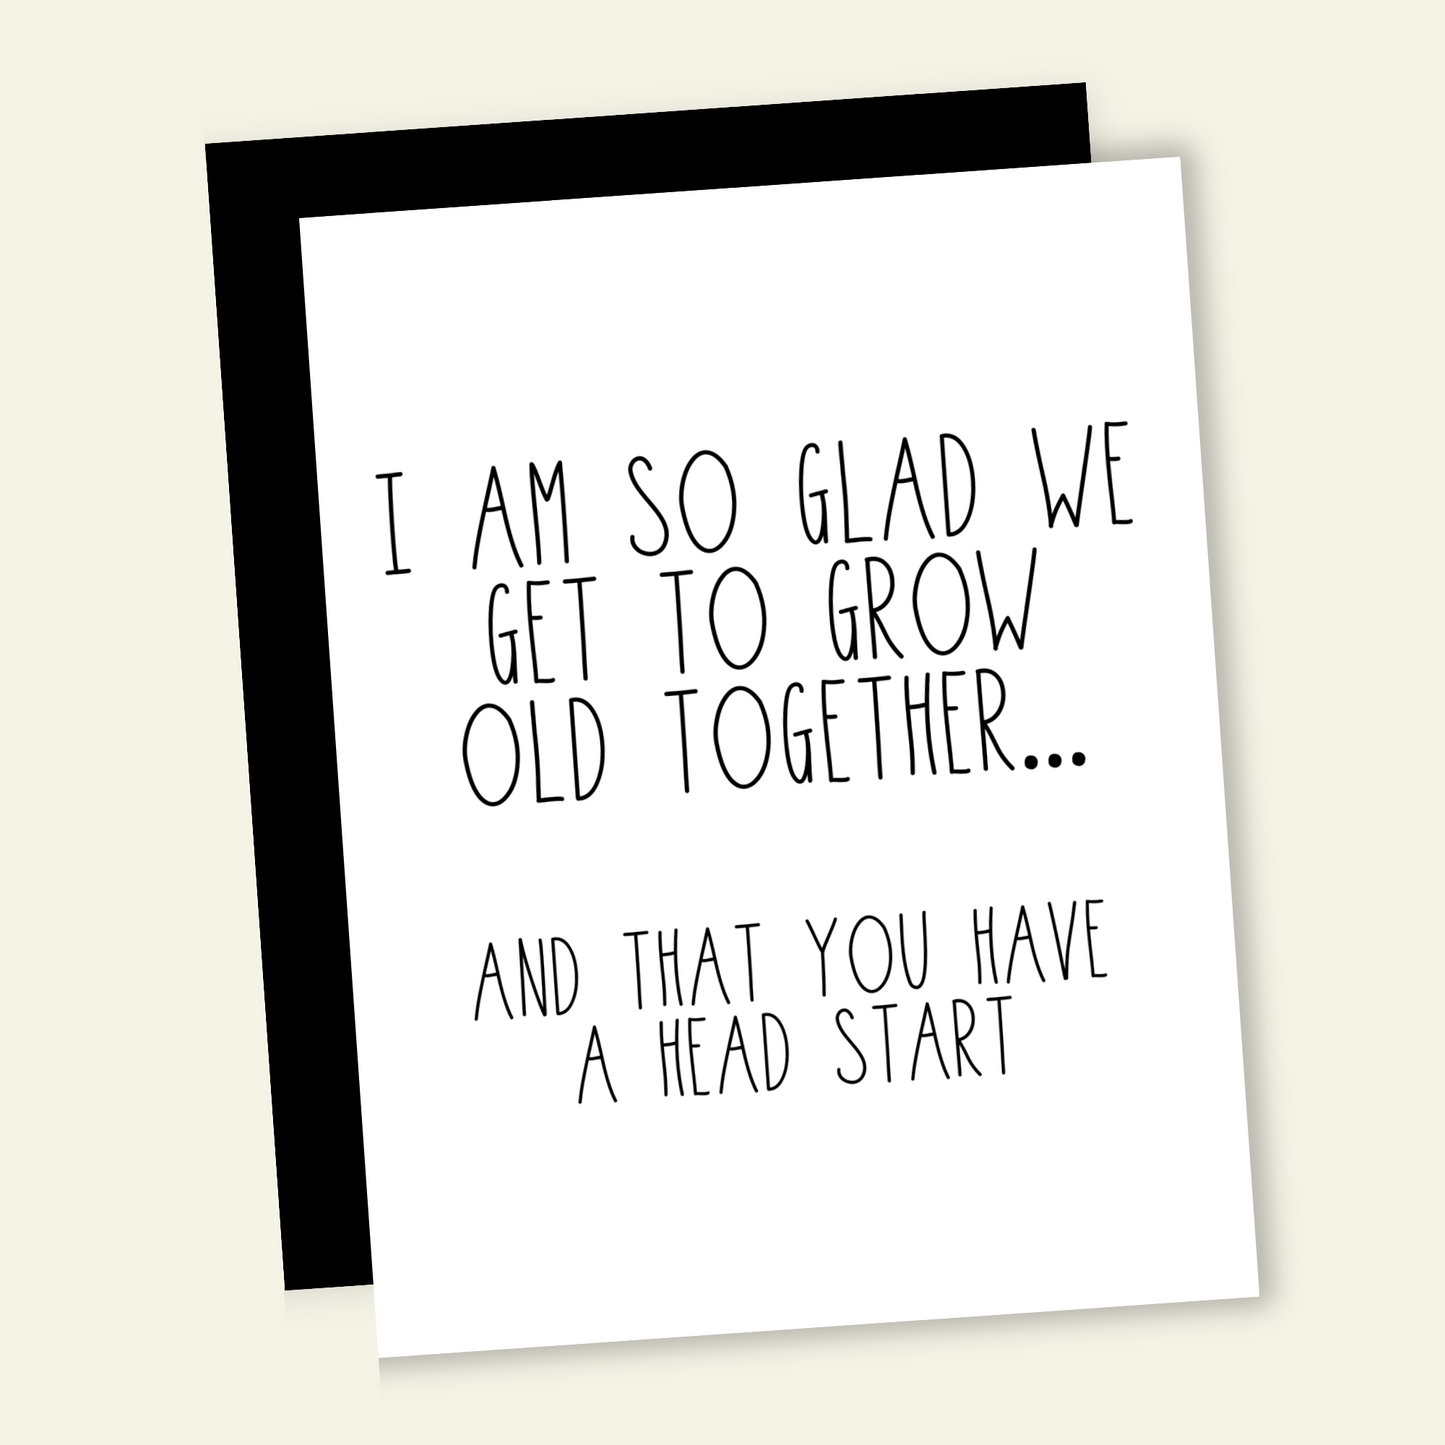 Glad We Get to Grow Old Together... Birthday Card